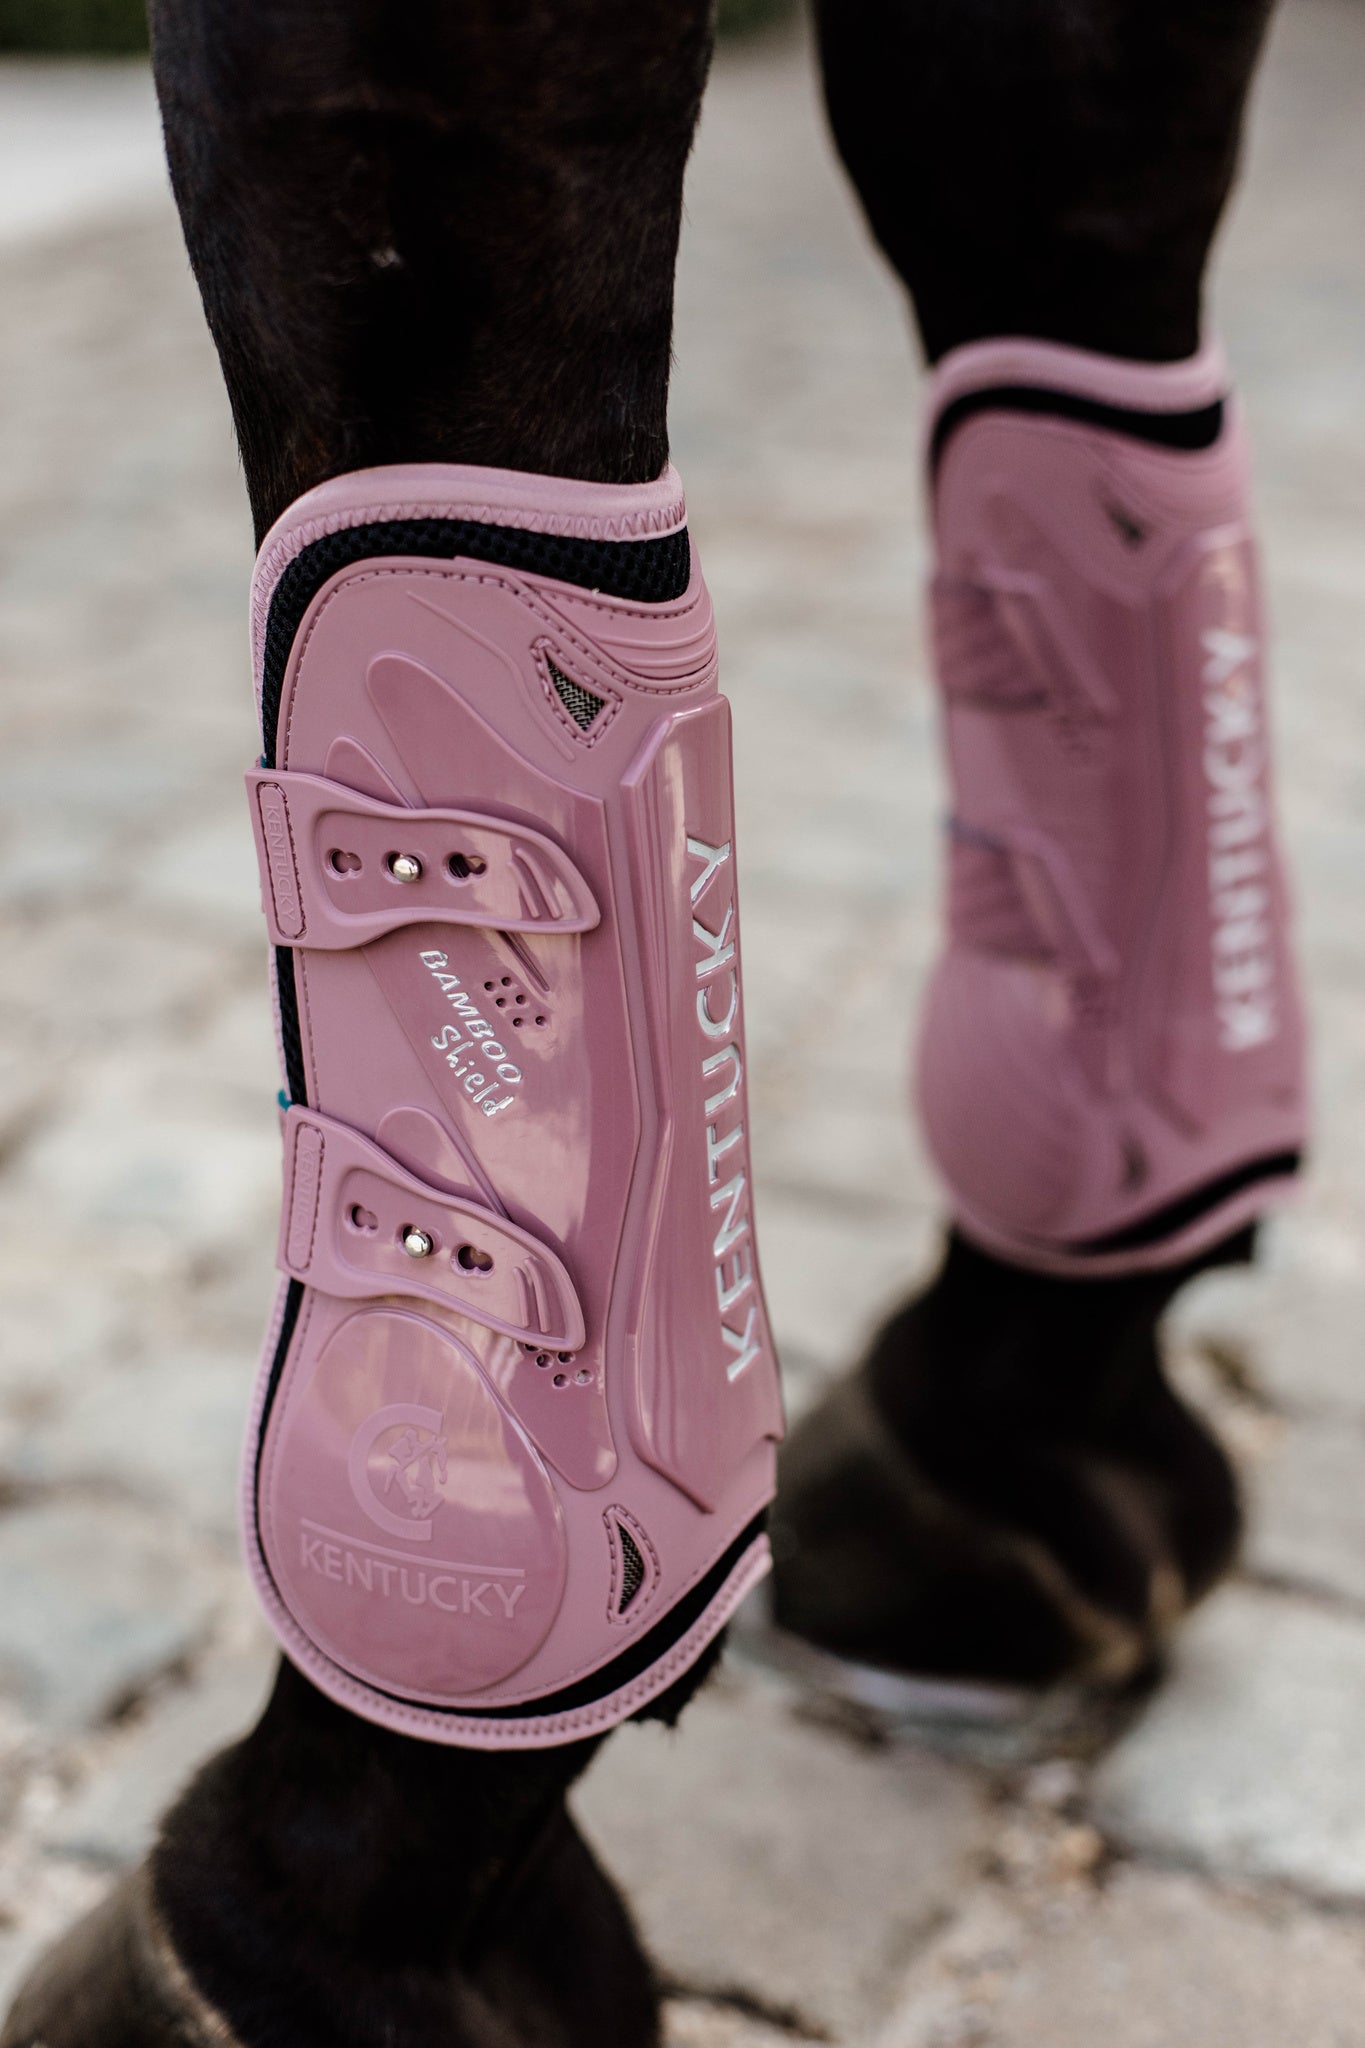 Kentucky Vegan Tendon Boots Bamboo Shield with Elastic fastenings are now available following years of research and development. The Kentucky Bamboo Shield Replaces the Kentucky Tendon Boot. 